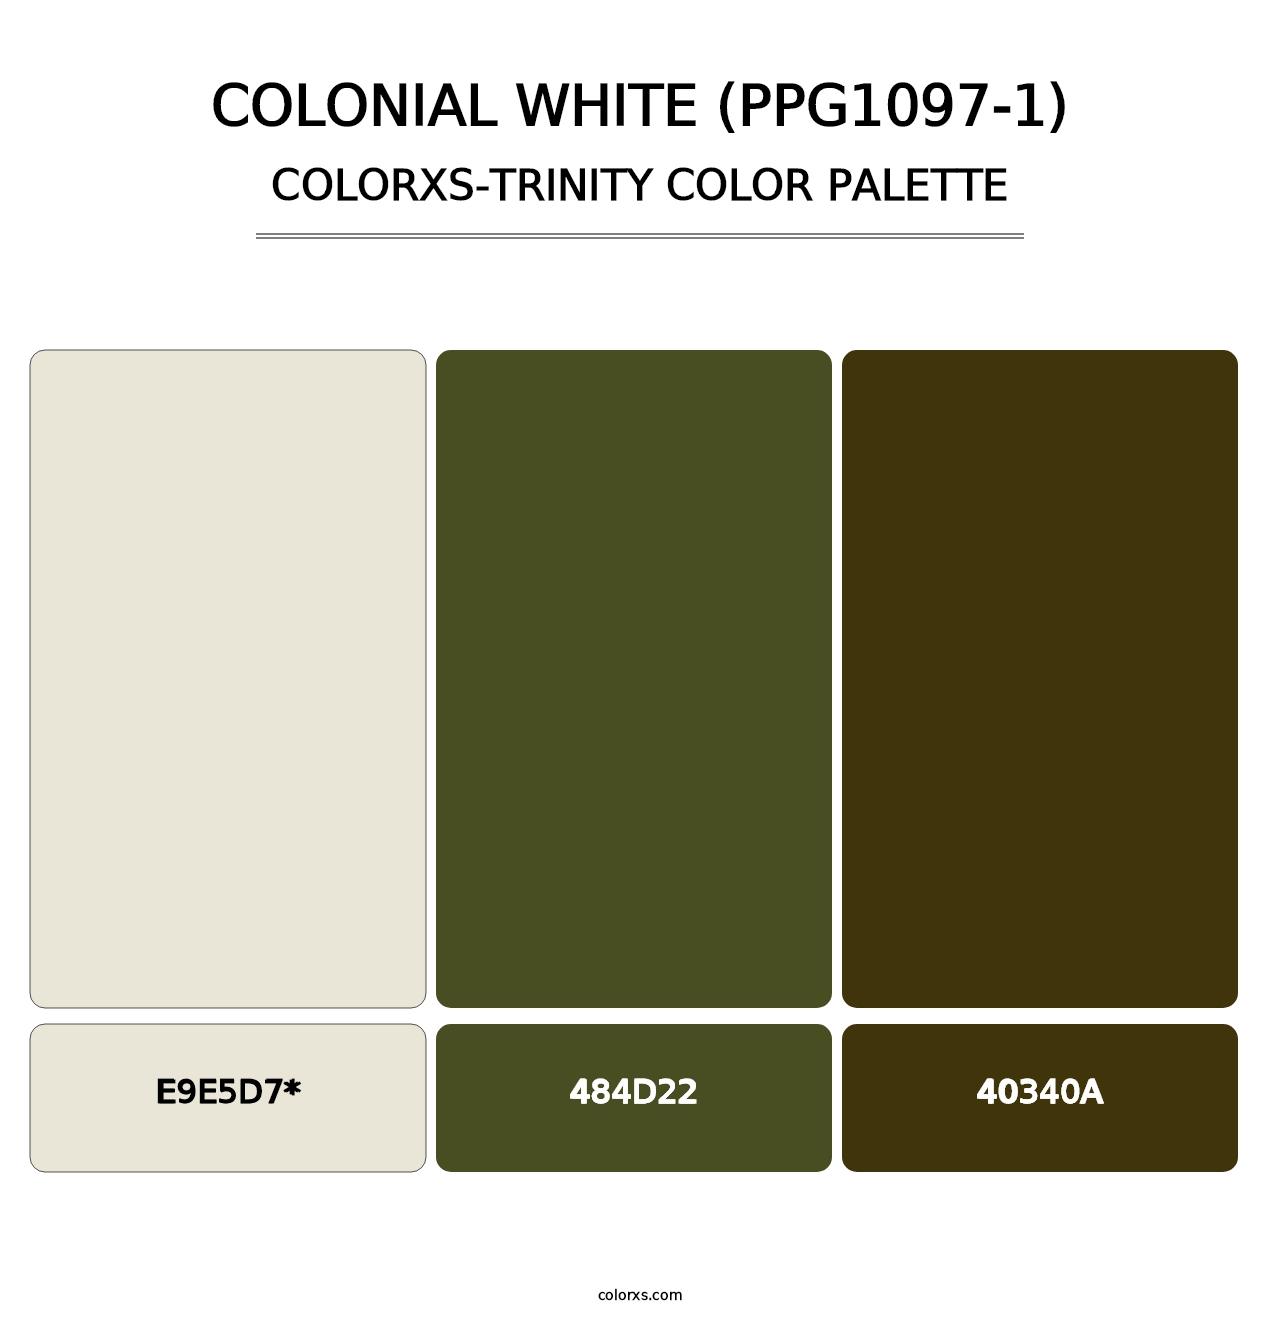 Colonial White (PPG1097-1) - Colorxs Trinity Palette